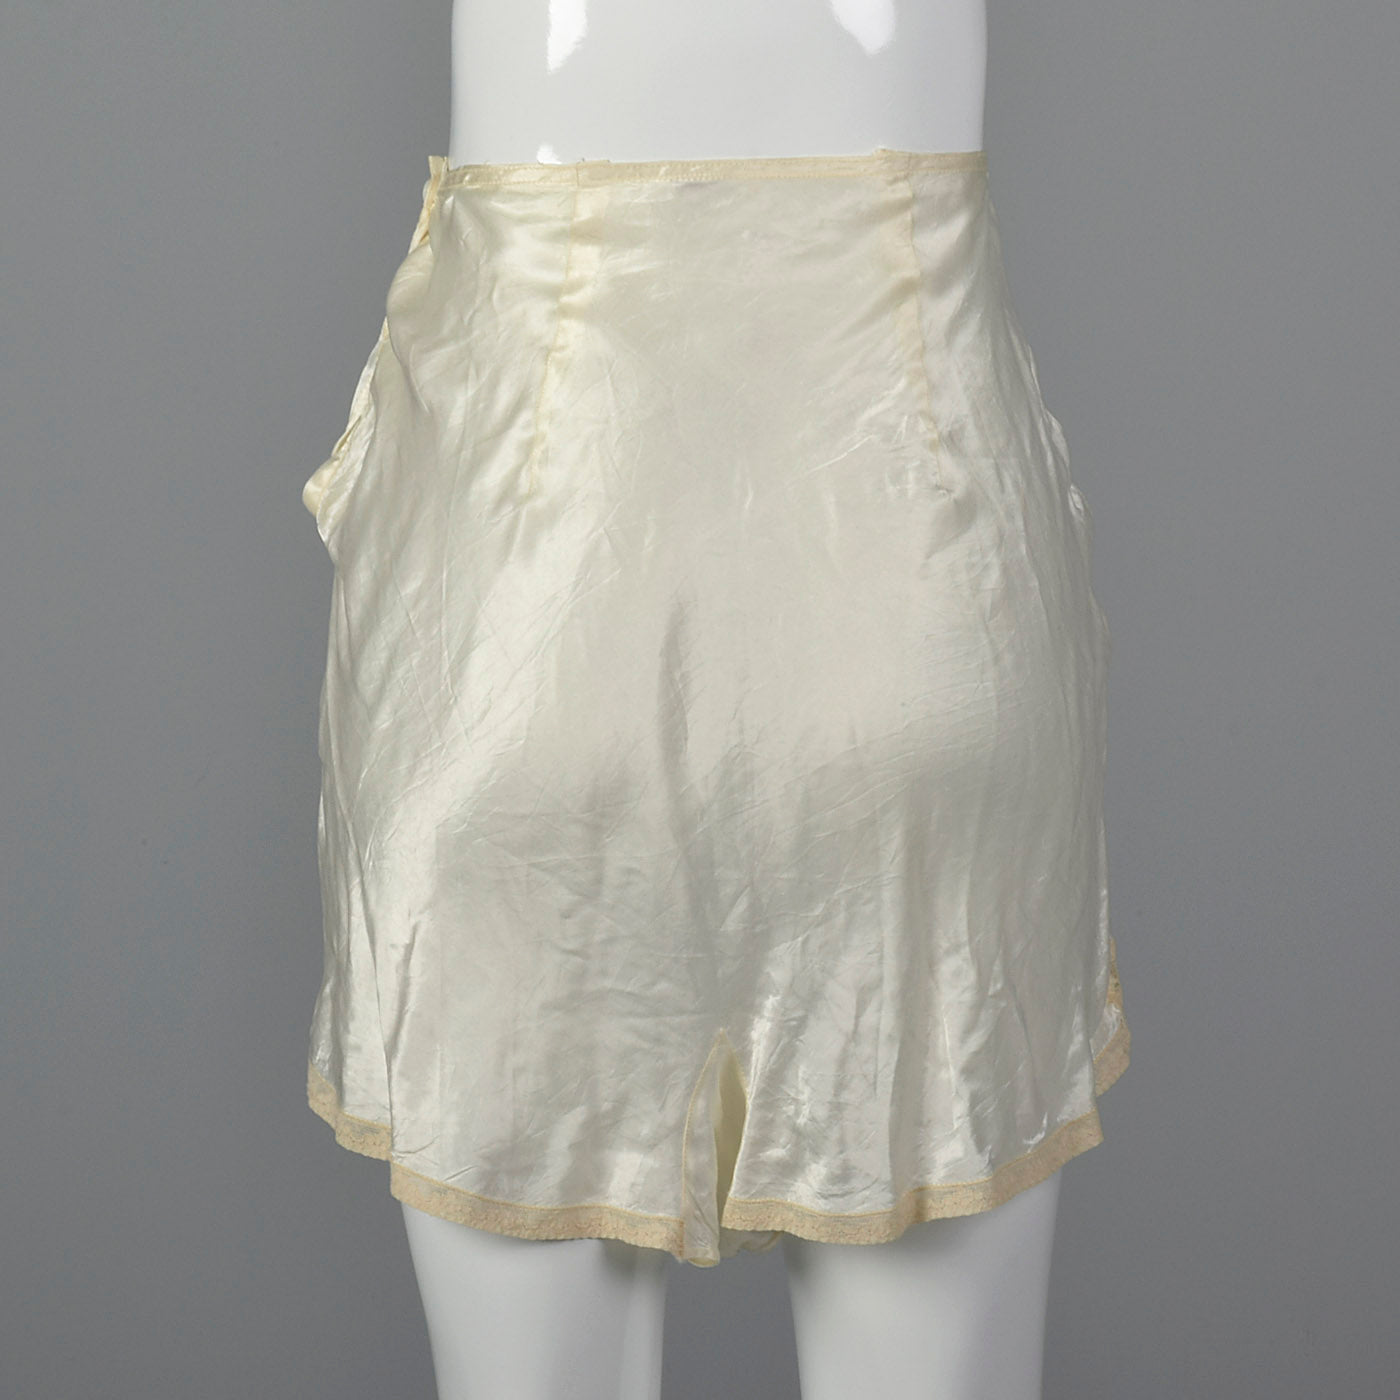 1930s White Slip Shorts with Lace Trim